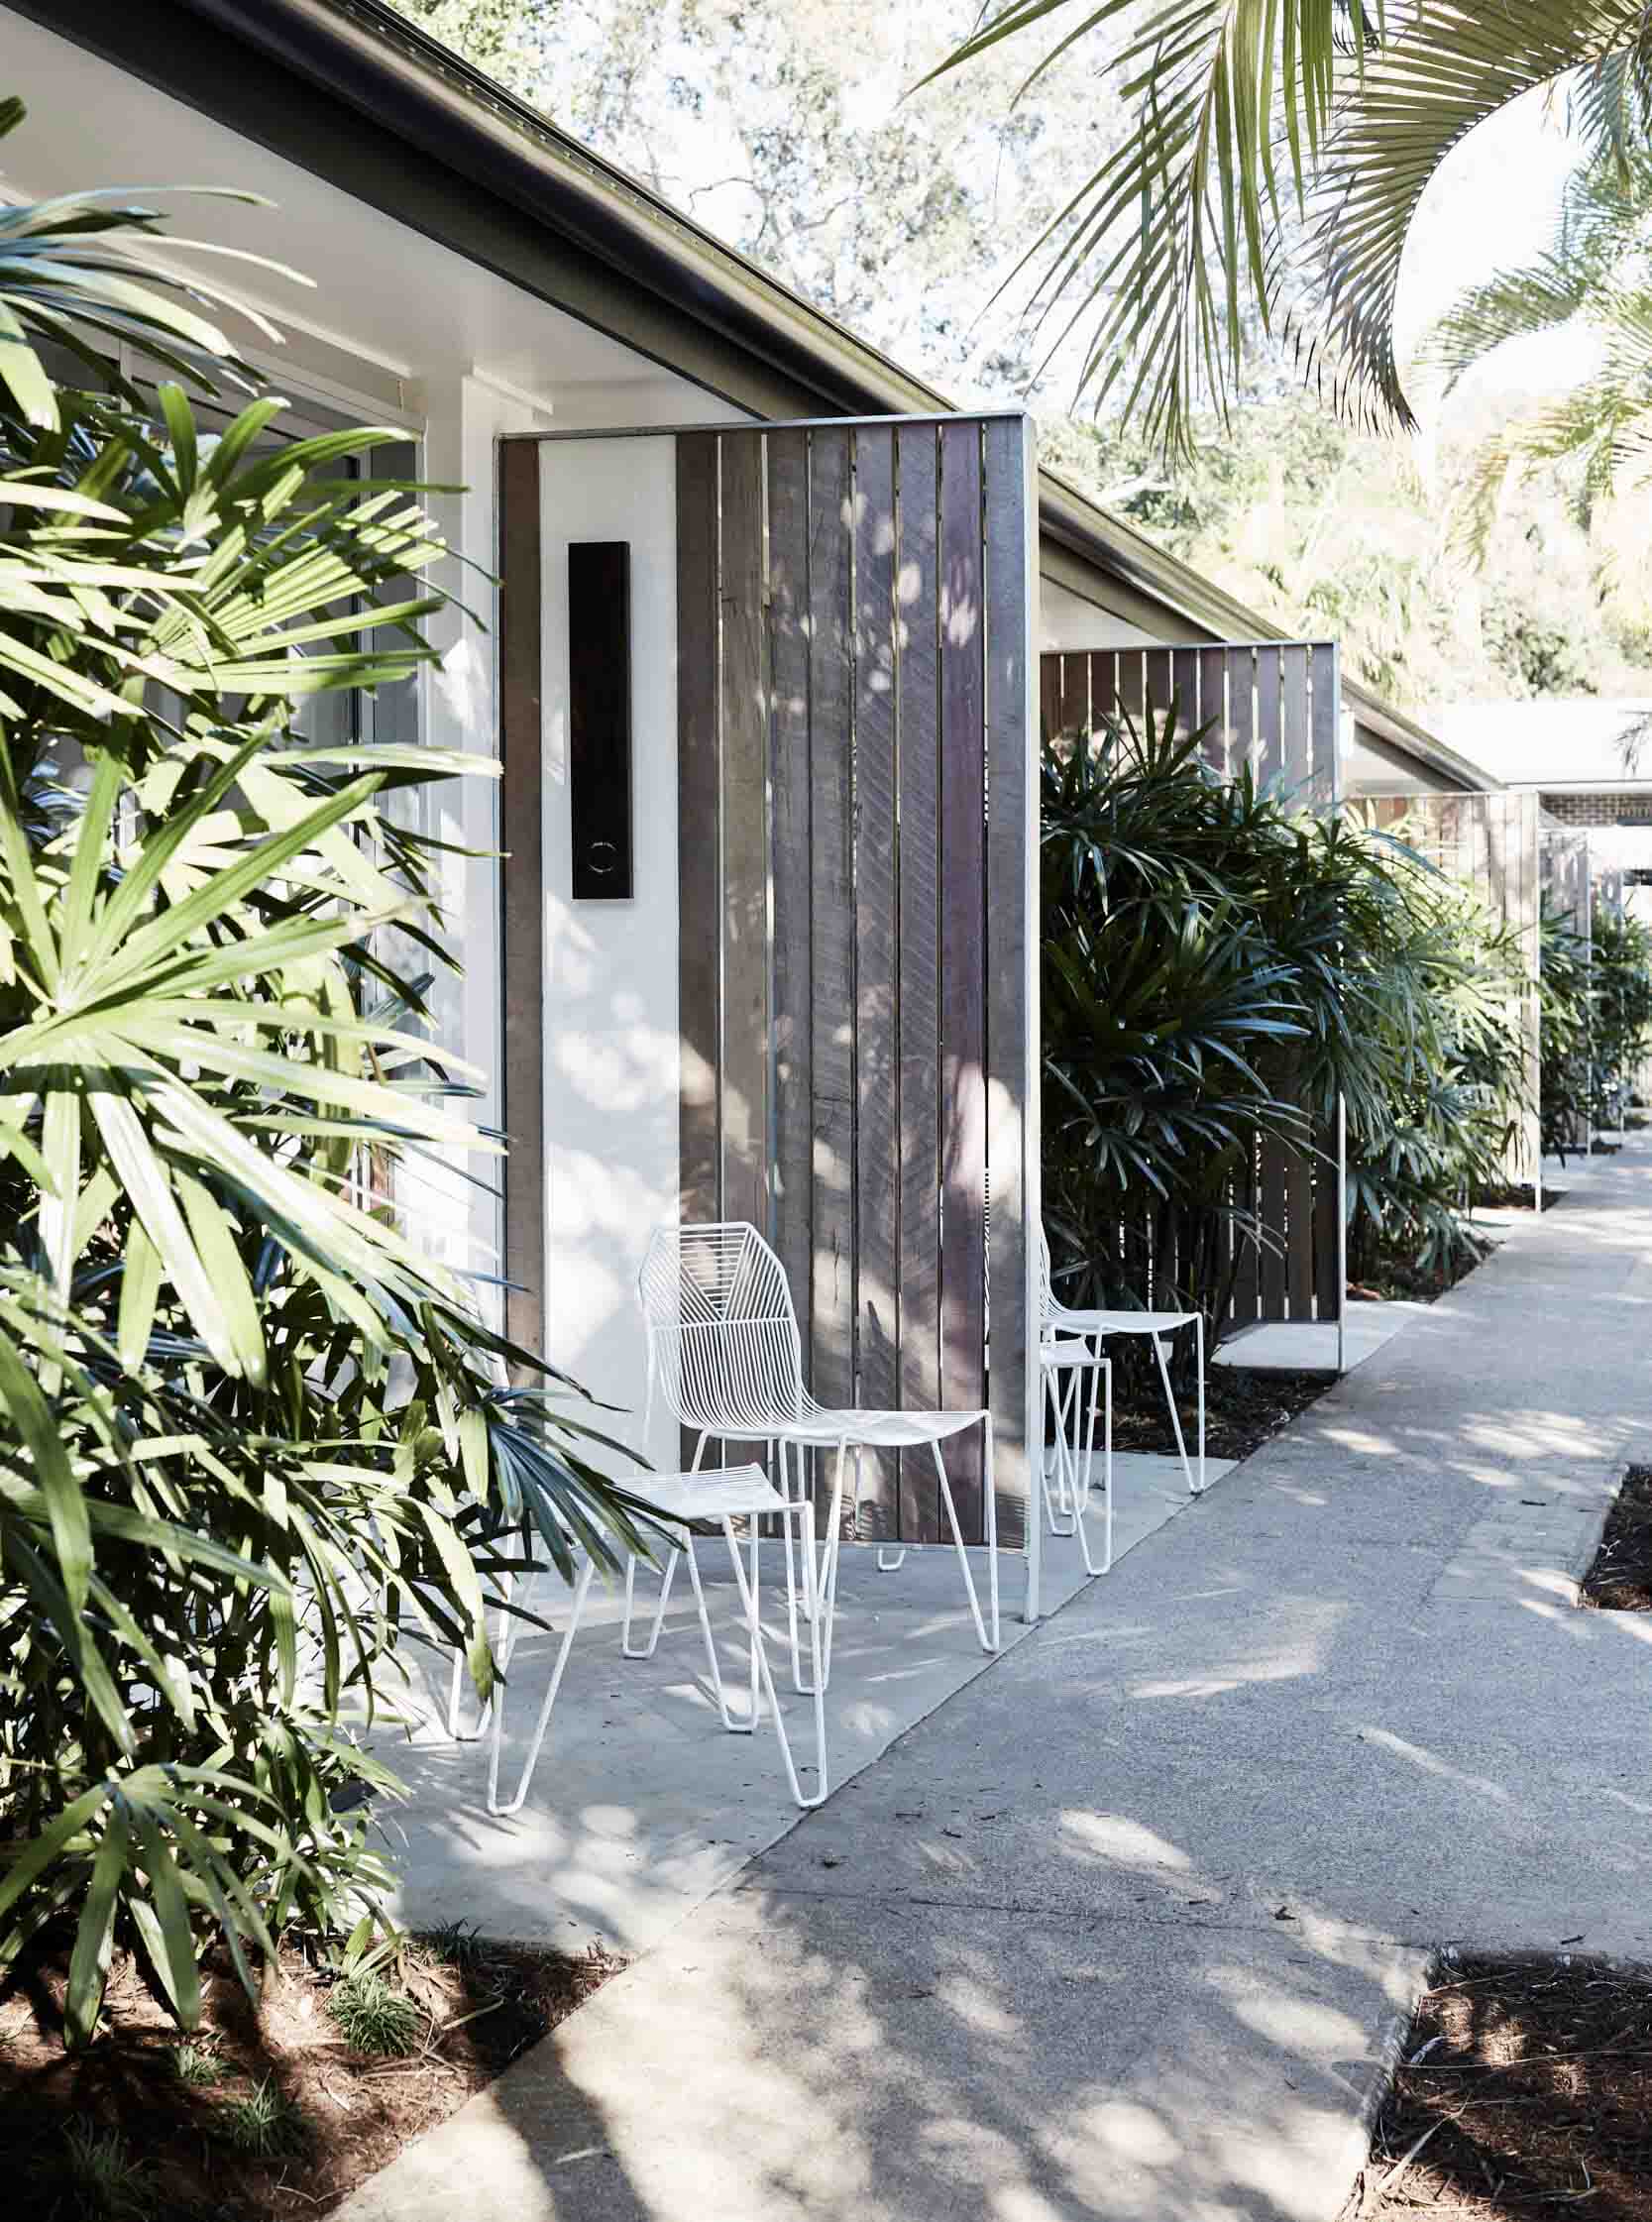 Entrance to the Bower Suites, The Bower Byron Bay hotel with large Raphis Palms and white metal seating